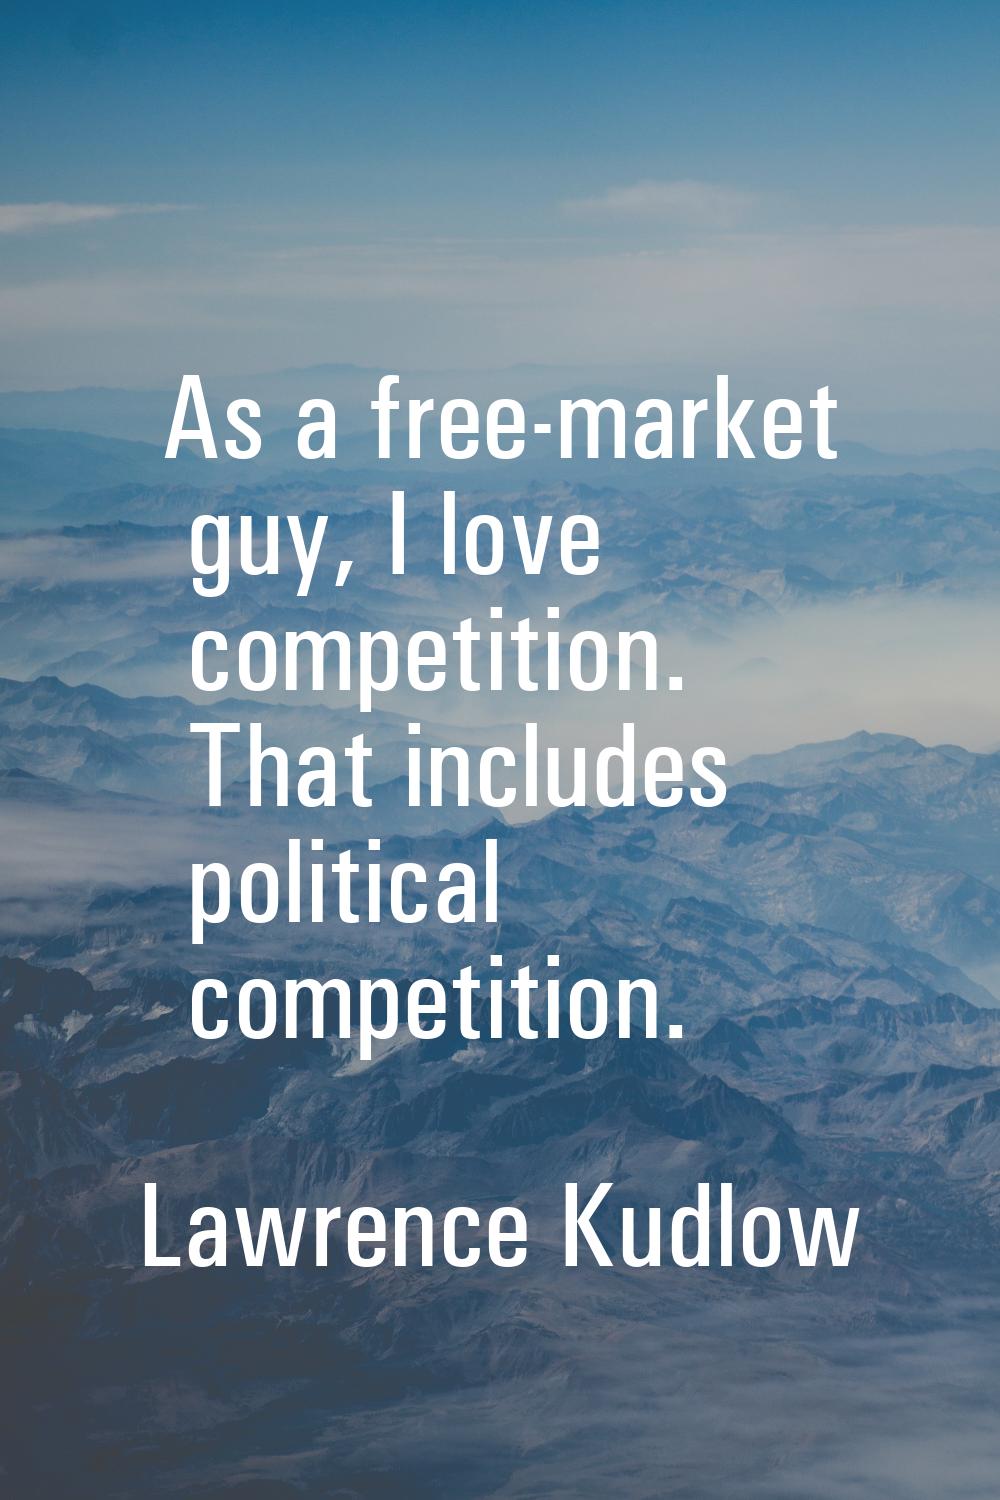 As a free-market guy, I love competition. That includes political competition.